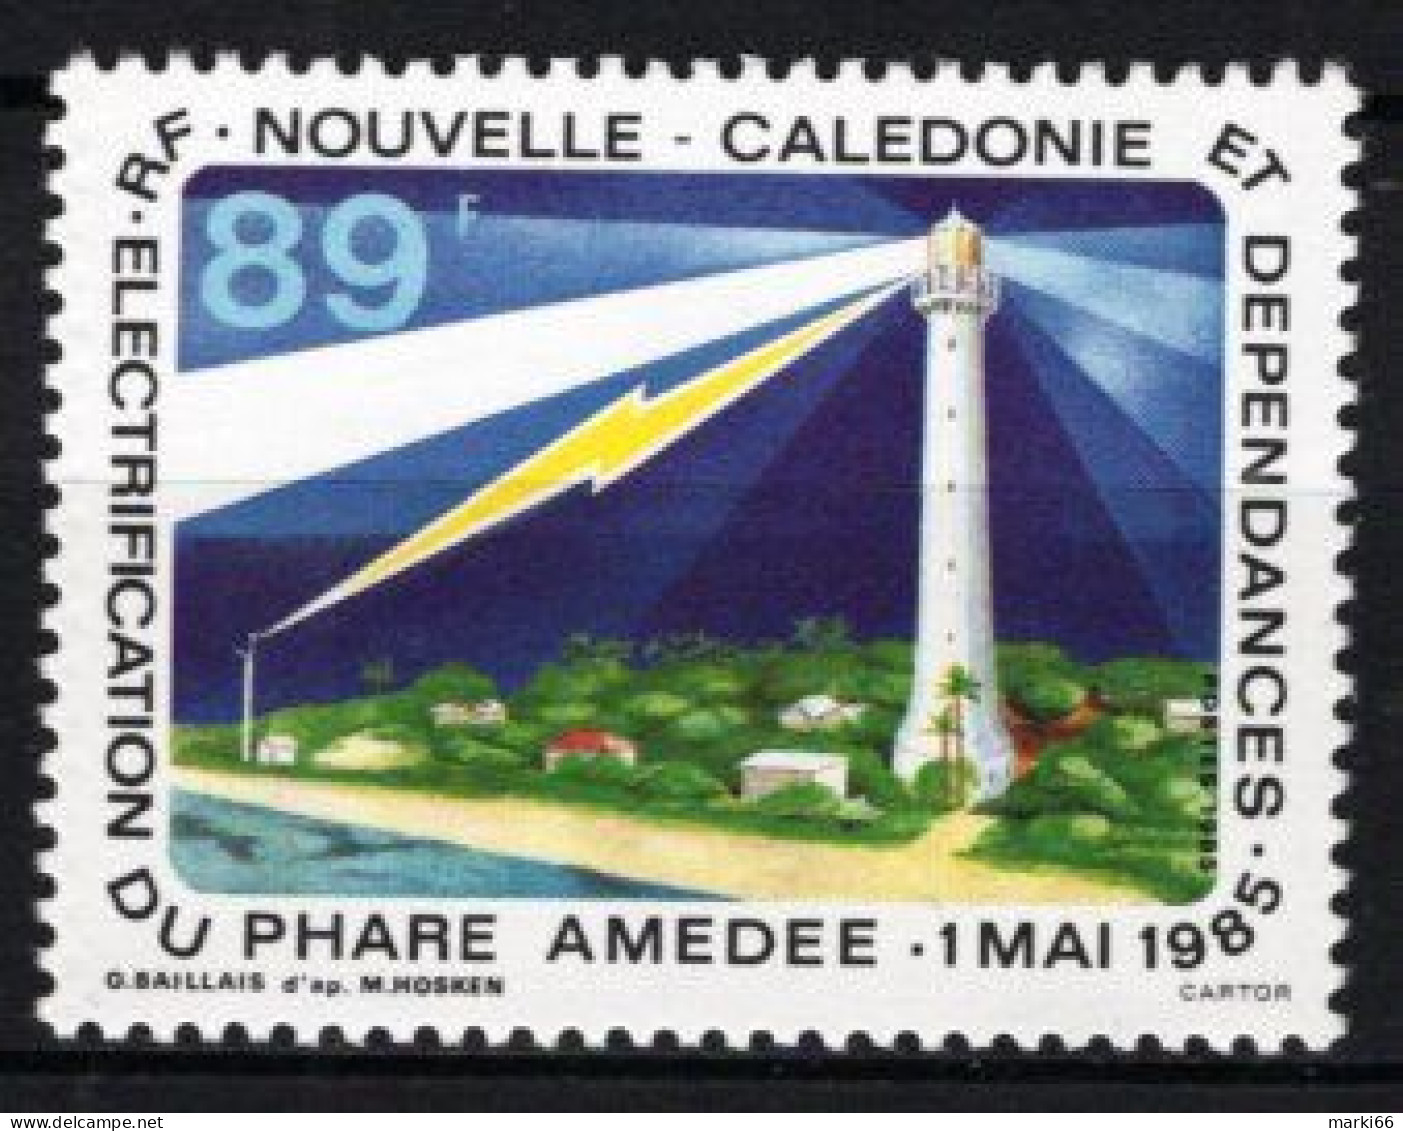 New Caledonia - 1985 - Electrification Amedee Lighthouse In 1985 - Mint Stamp - Nuovi